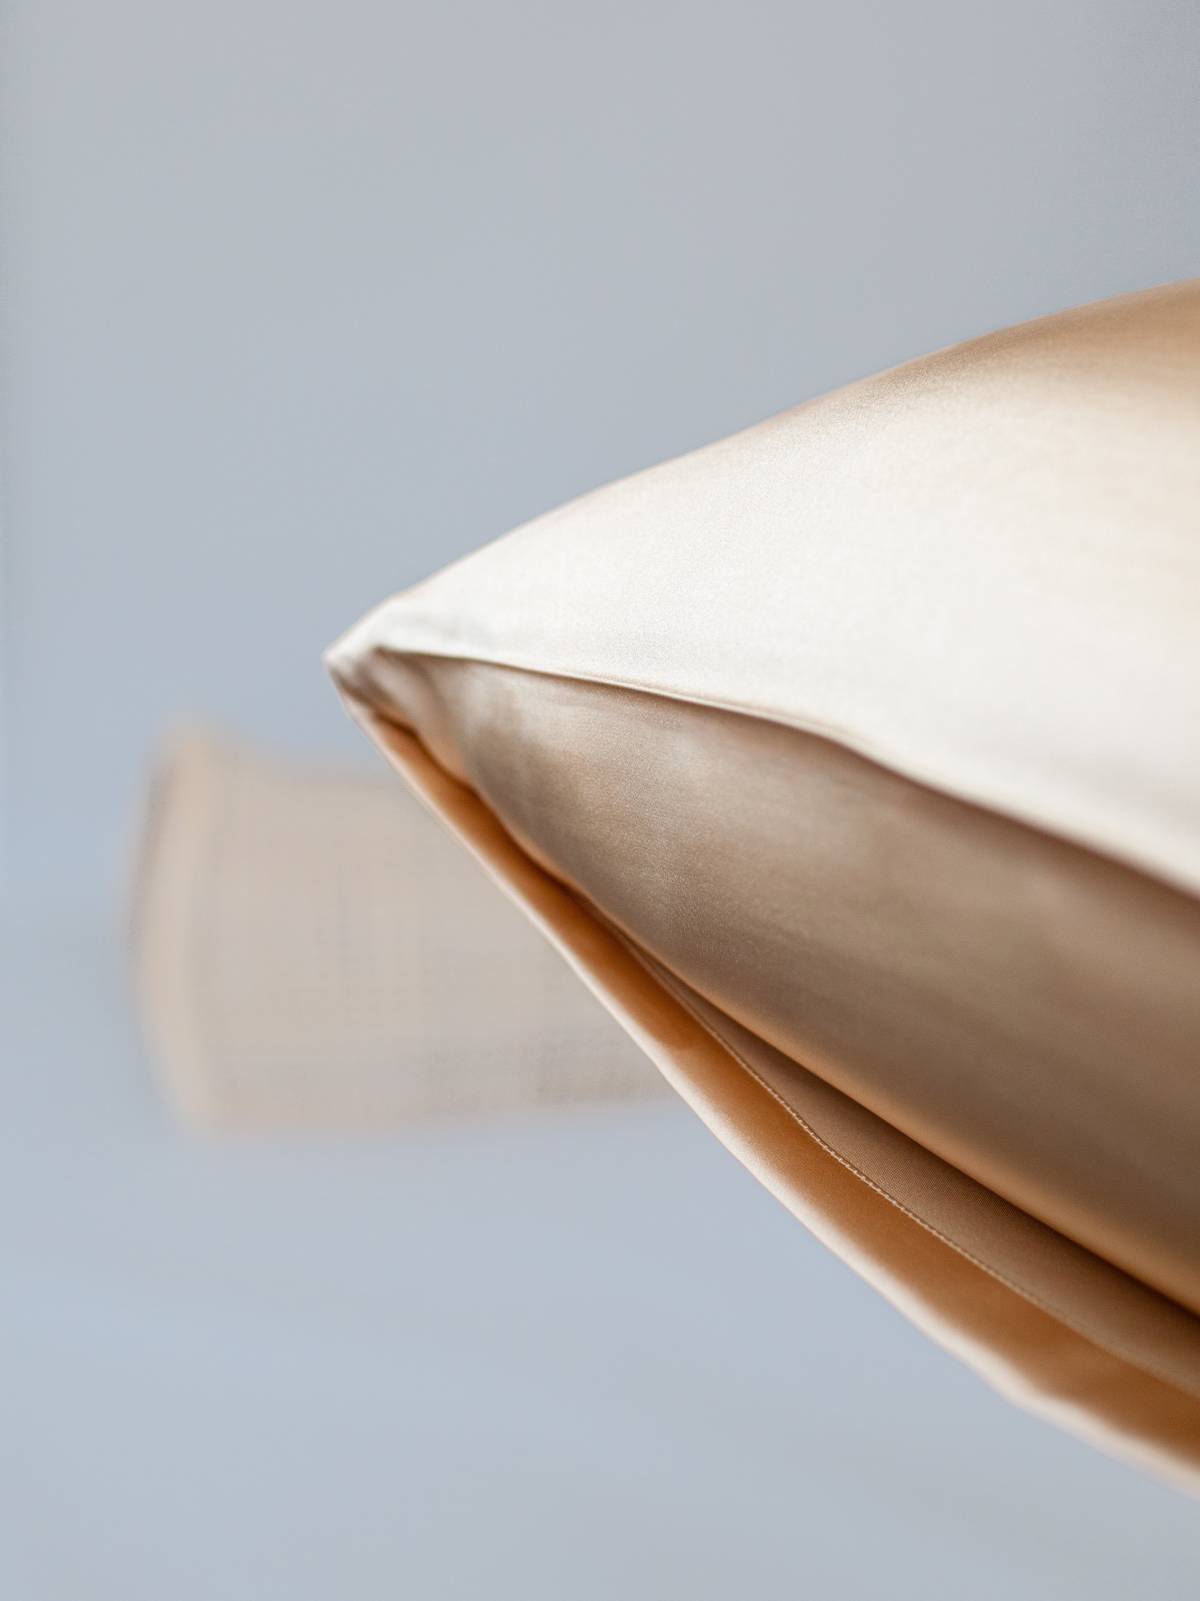 Silk Pillow Case in Gold Pearl